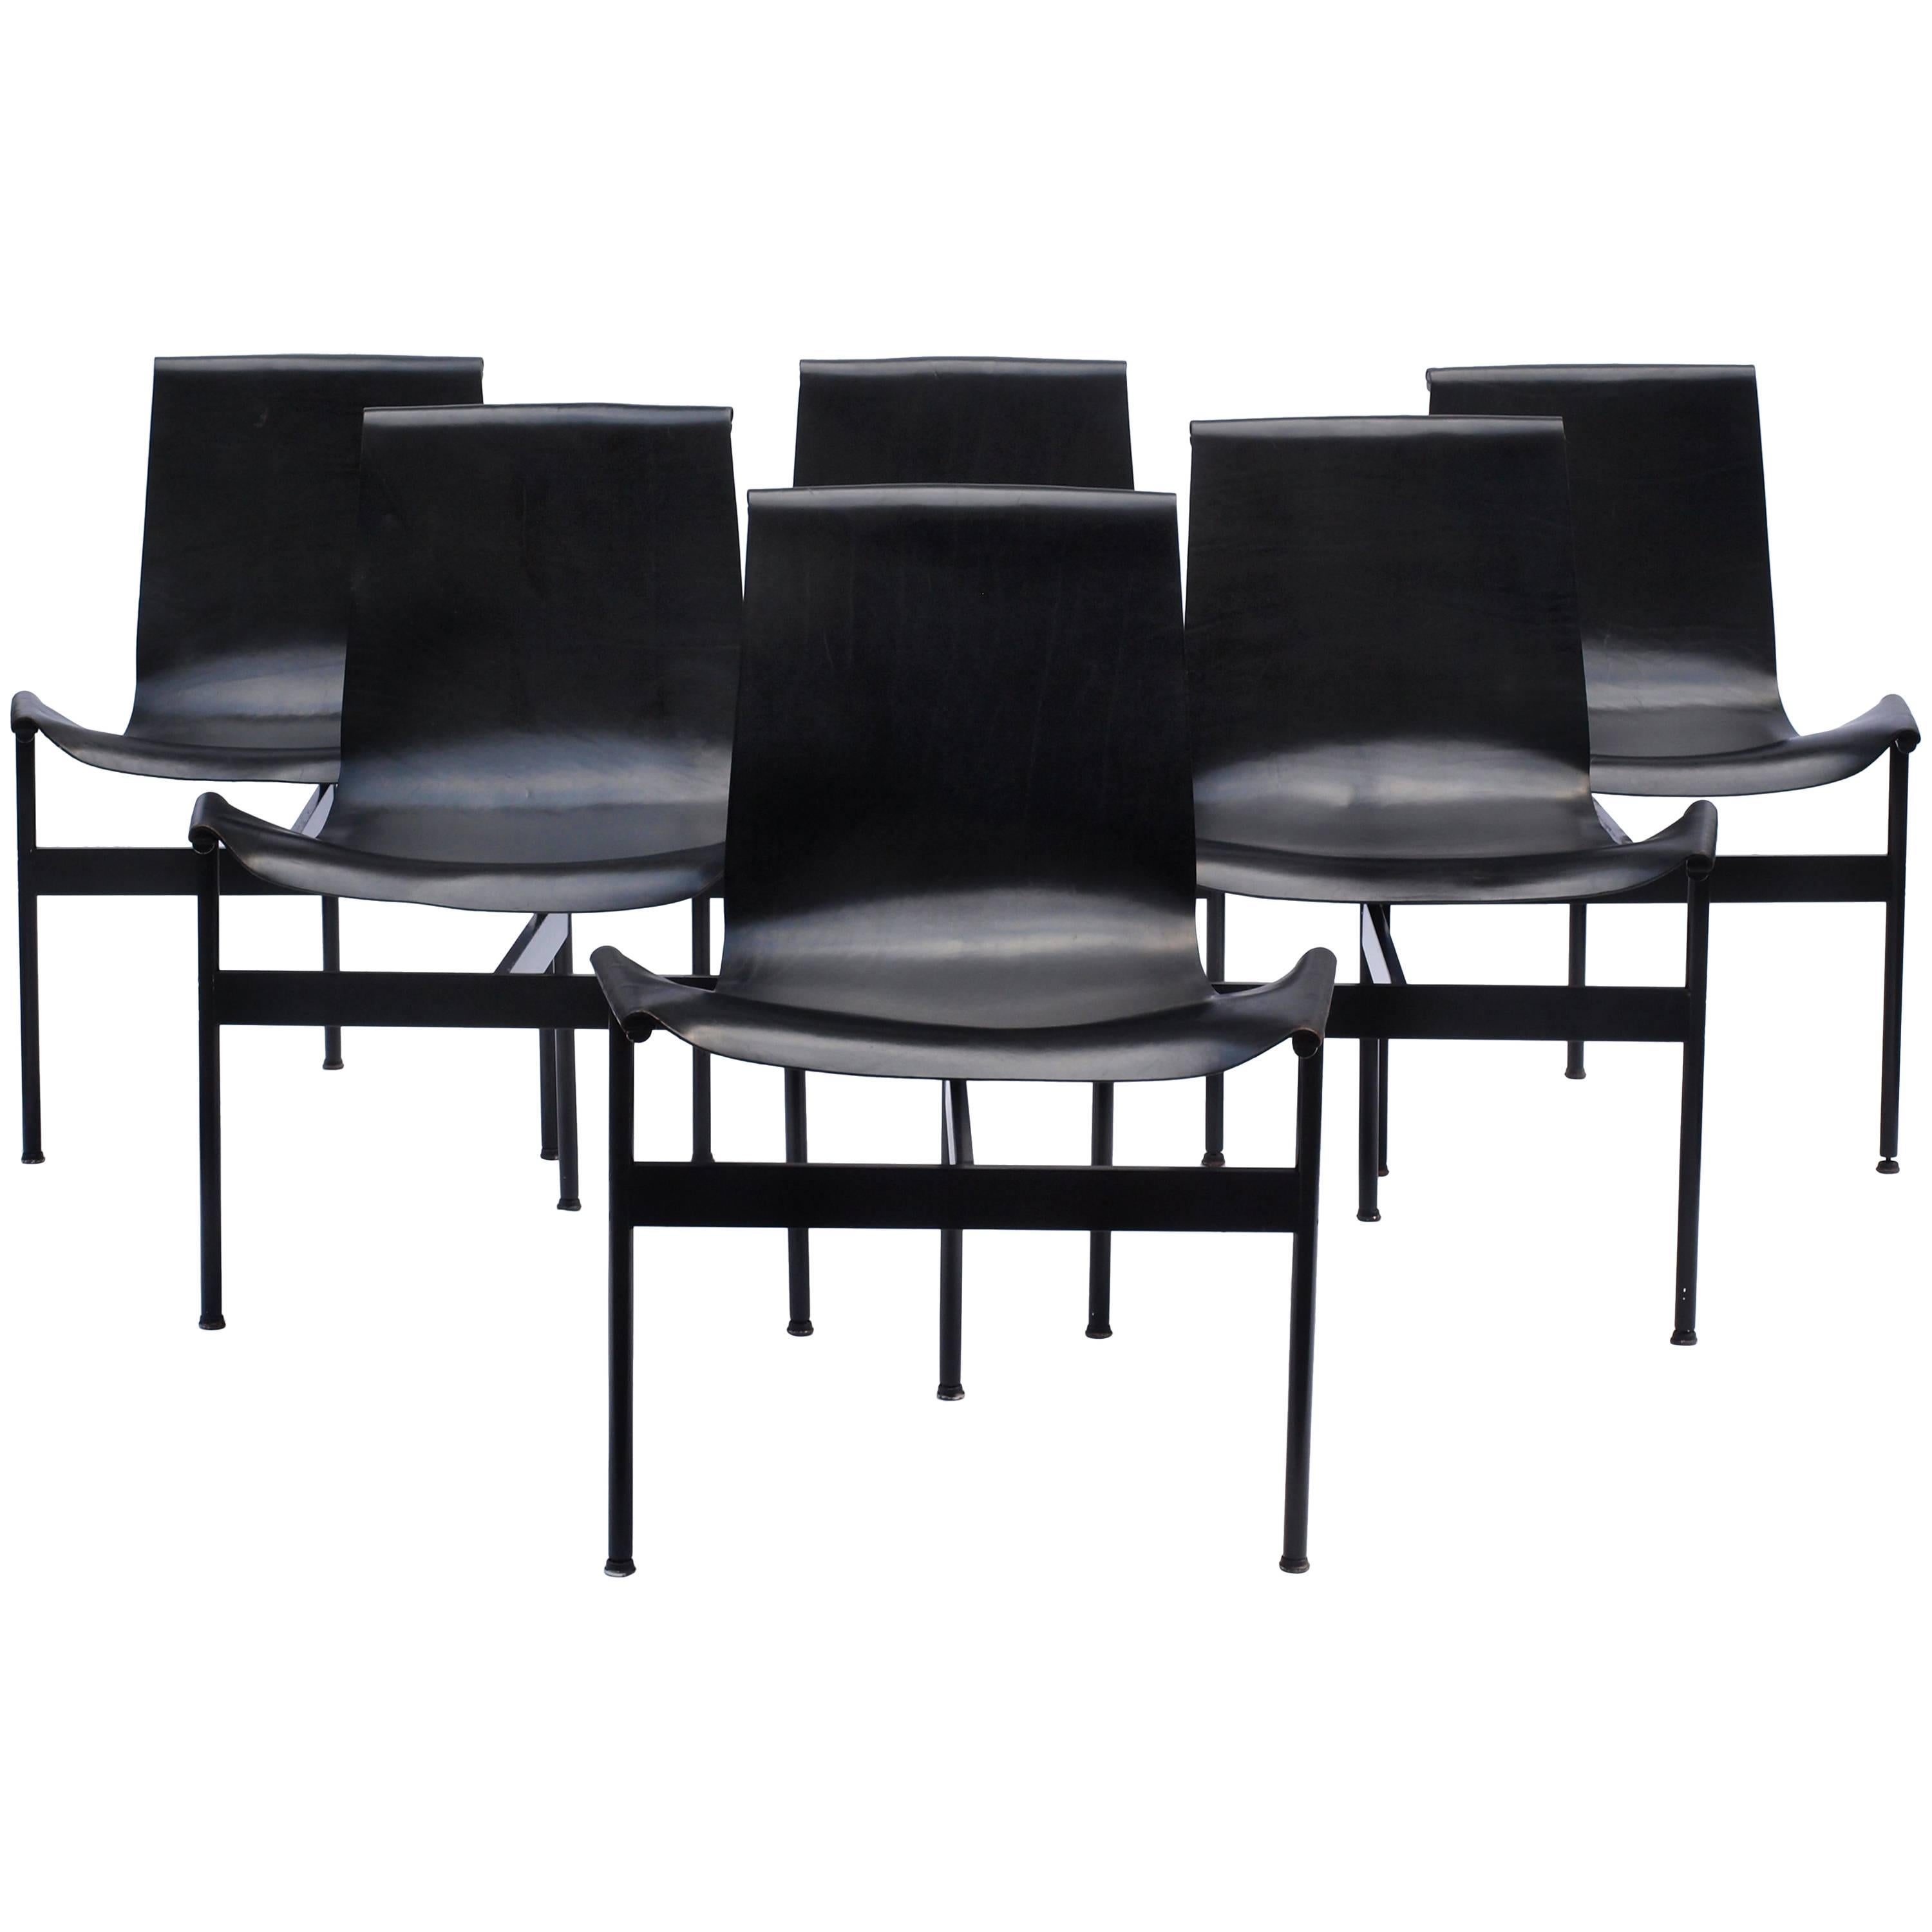 Set of Six Black T-Chairs by William Katavolos for Laverne International